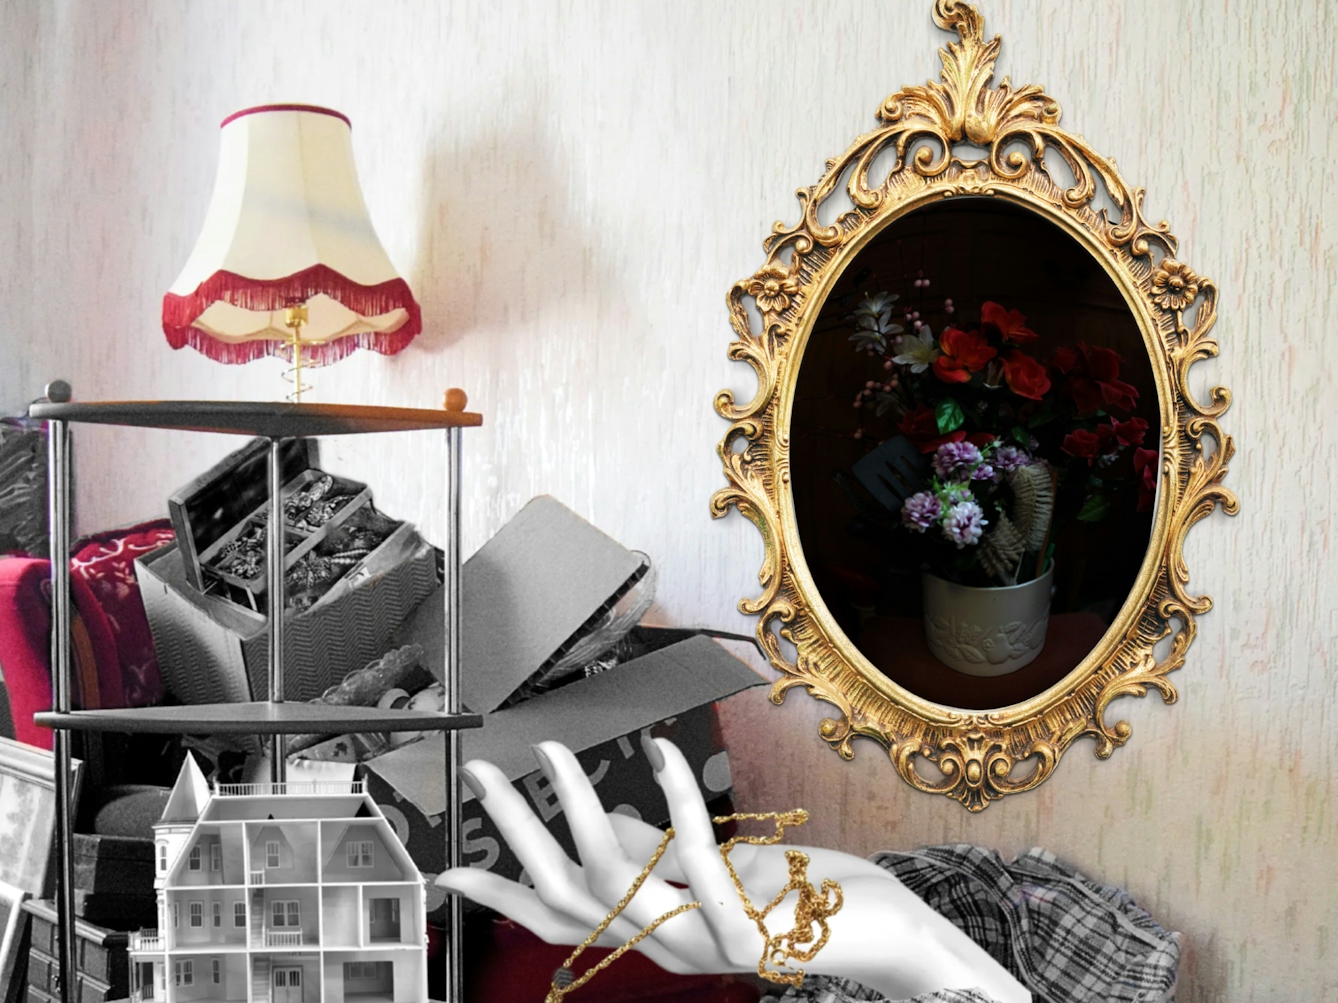 Crop of a larger colourful photograph with some coloured and black and white collage elements. The photo is of an empty living room with patterned off-white wallpaper, a red floral patterned sofa and a patterned carpet. There are pieces of black and white furniture in a pile next to and on top of the red sofa, including lamps, picture frames, storage bags, jewellery boxes and a shelving unit. On the shelving unit is a three story dollhouse which is empty. A black and white mannequin hand is shown coming out of a storage bag, and laced between its fingers is a golden pendant which is open and contains a photo of a girl and her grandma. On the wall is a ornate golden photo frame that contains a photo of a vase of different coloured flowers and a hairbrush. 